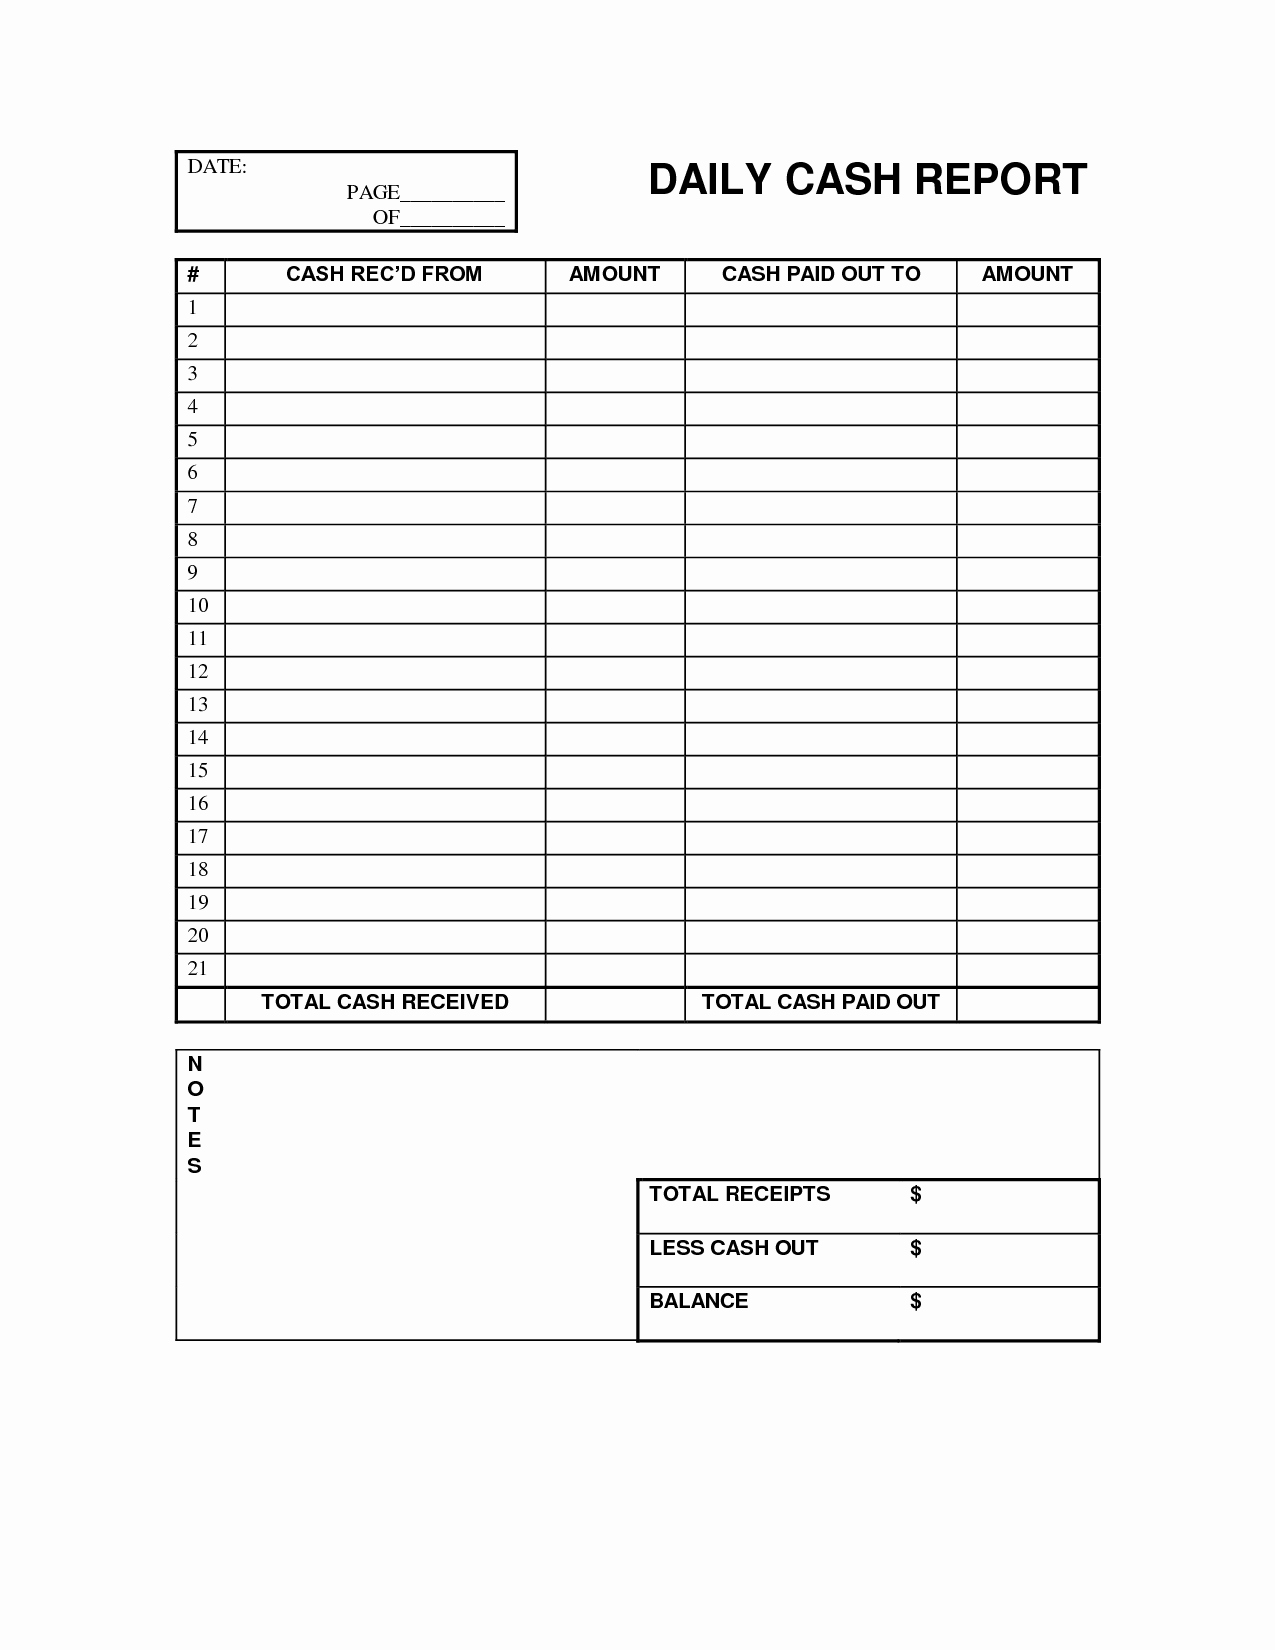 Daily Cash Report Template Best Of Cash Log Out